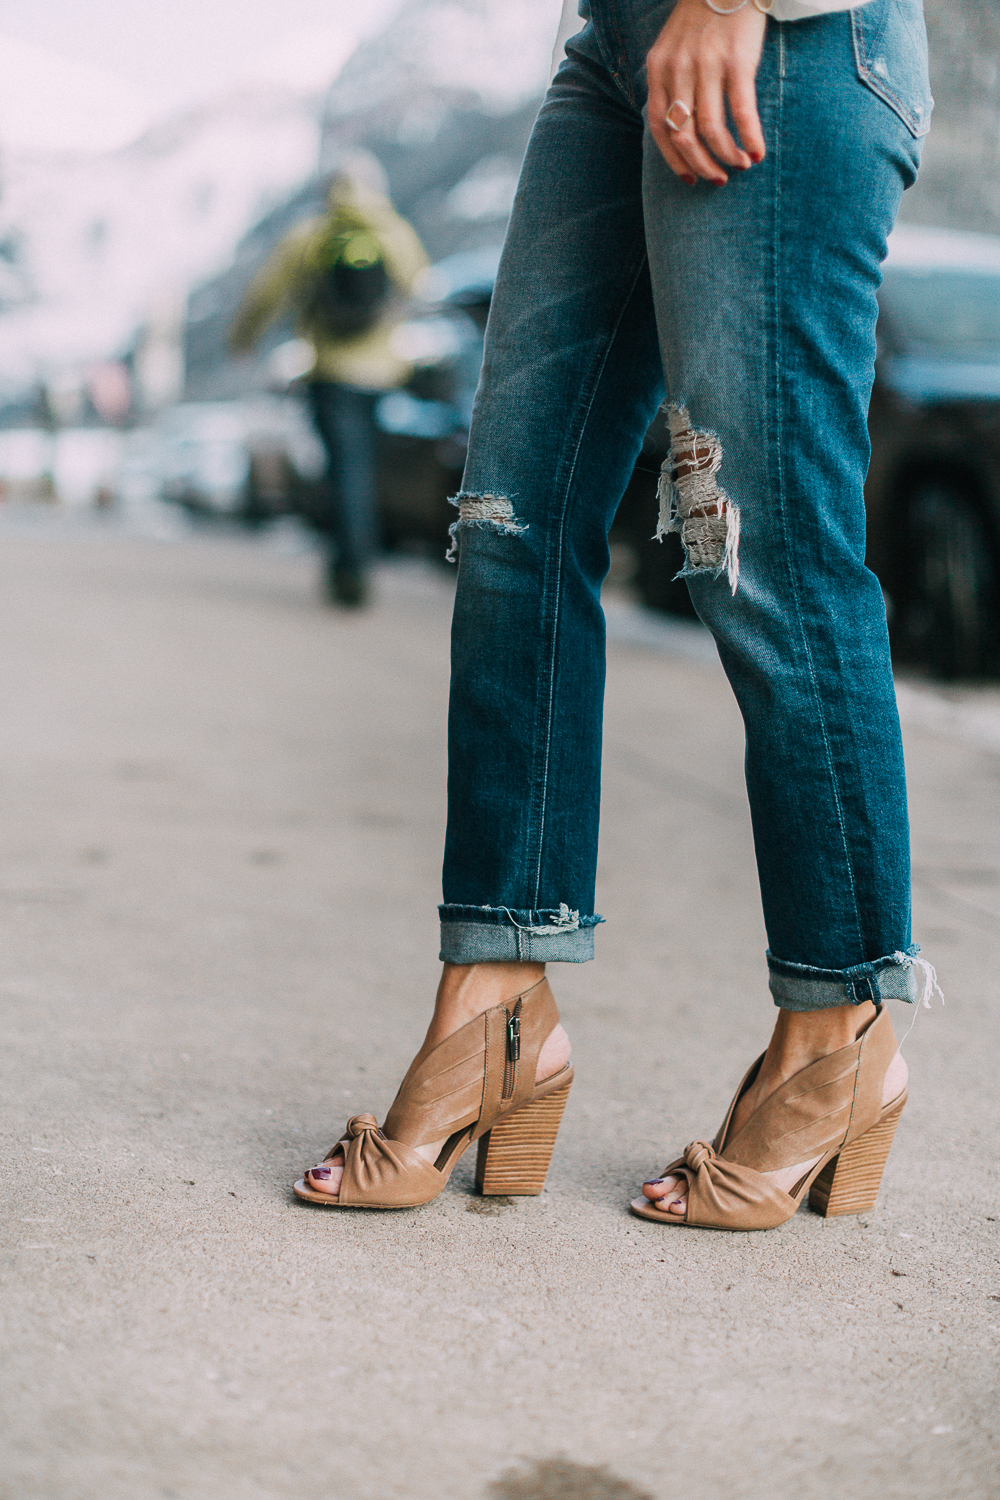 nude vince camuto kerra sandals with heel and top knot work with destroyed boyfriend jeans